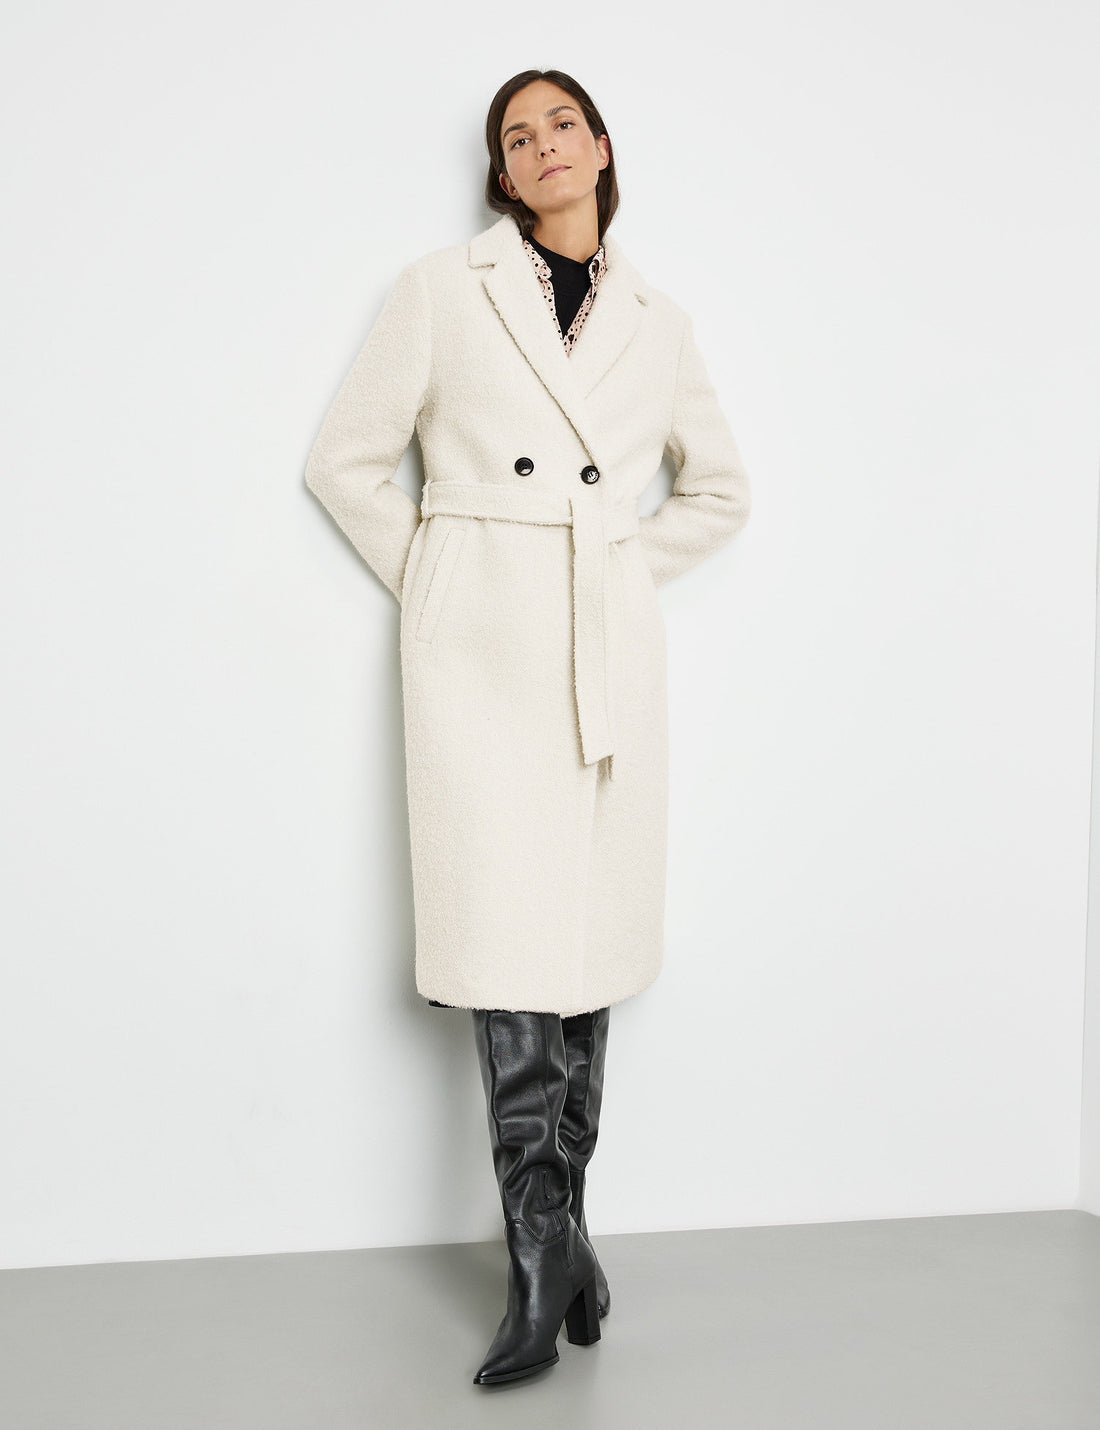 Wool Coat With A Bouclé Finish_250003-31130_99700_01